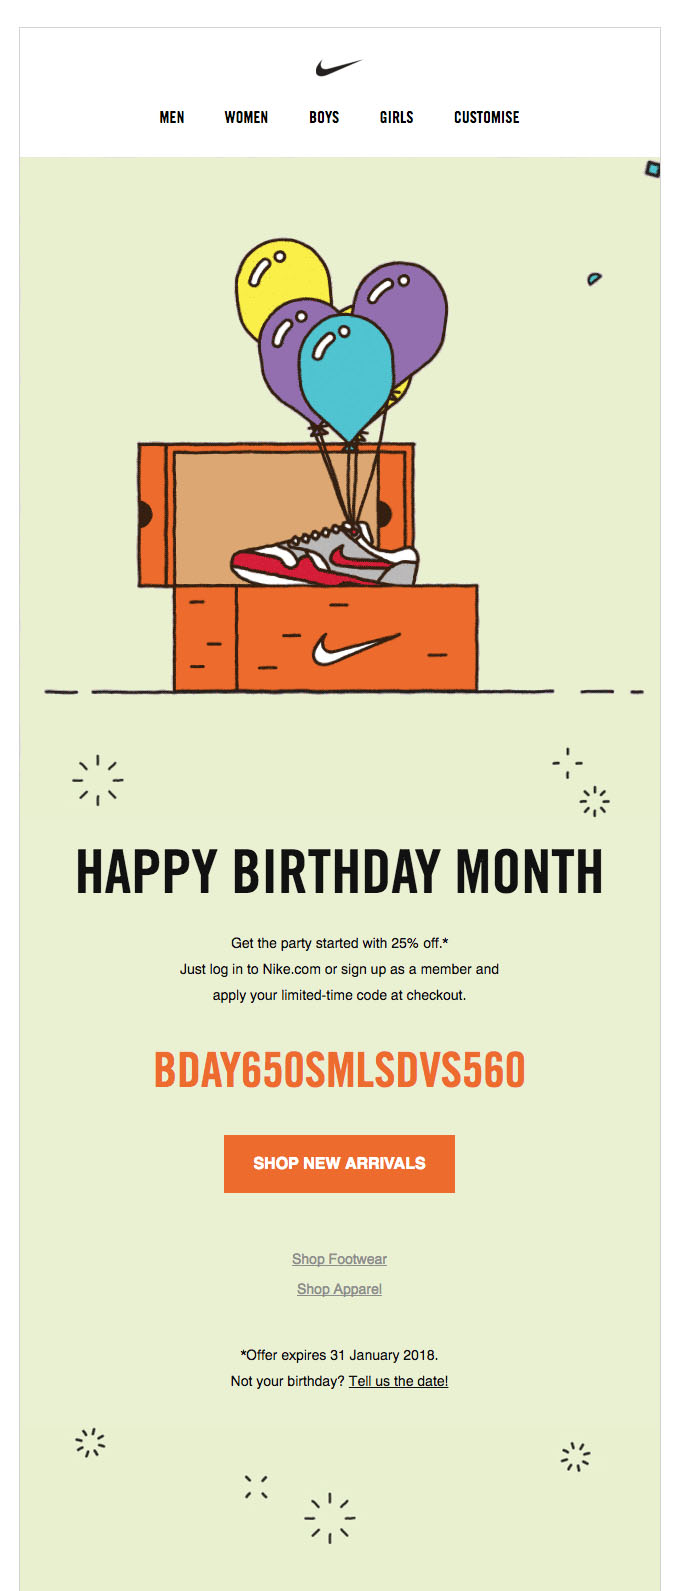 Promotional Emails - Birthday Email - Nike